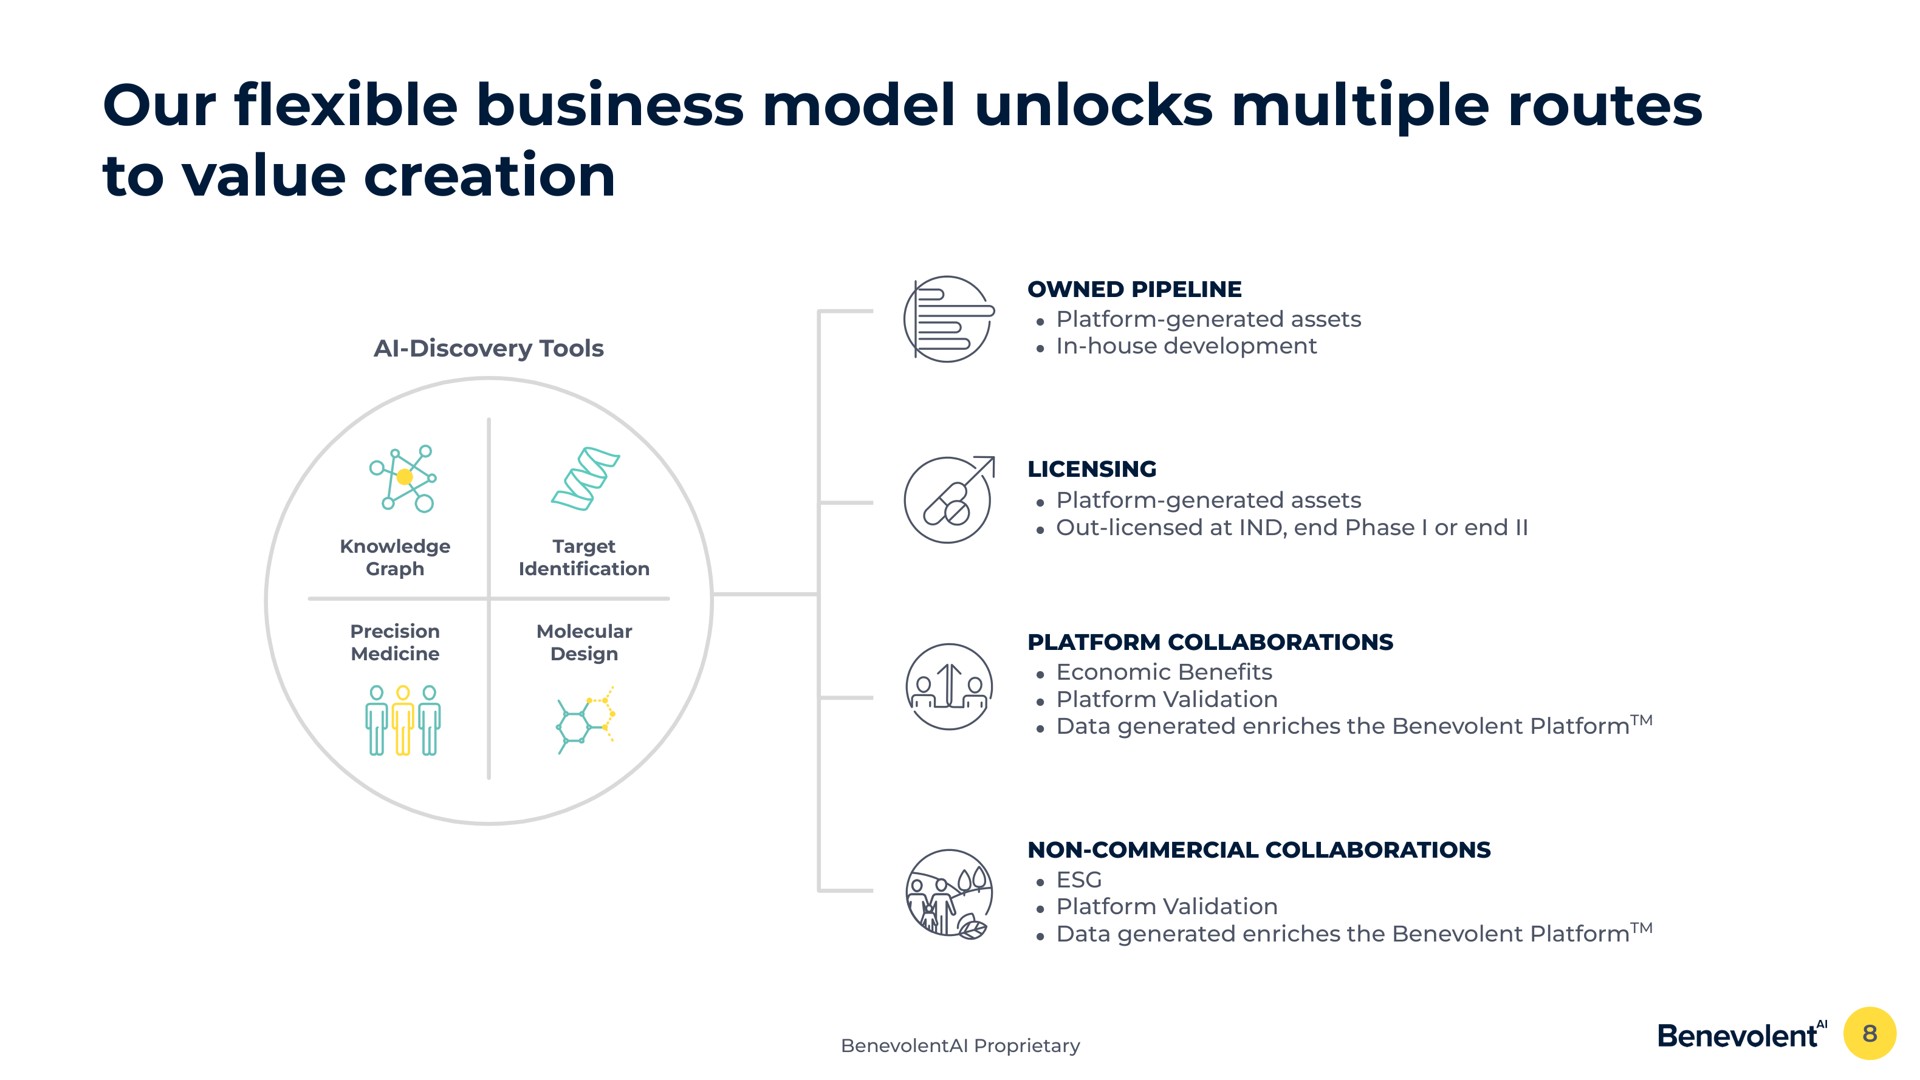 our business model unlocks multiple routes to value creation discovery tools owned pipeline platform generated assets in house development licensing platform generated assets out licensed at end phase i or end platform collaborations economic bene platform validation data generated enriches the benevolent non commercial collaborations platform validation data generated enriches the benevolent flexible | BenevolentAI